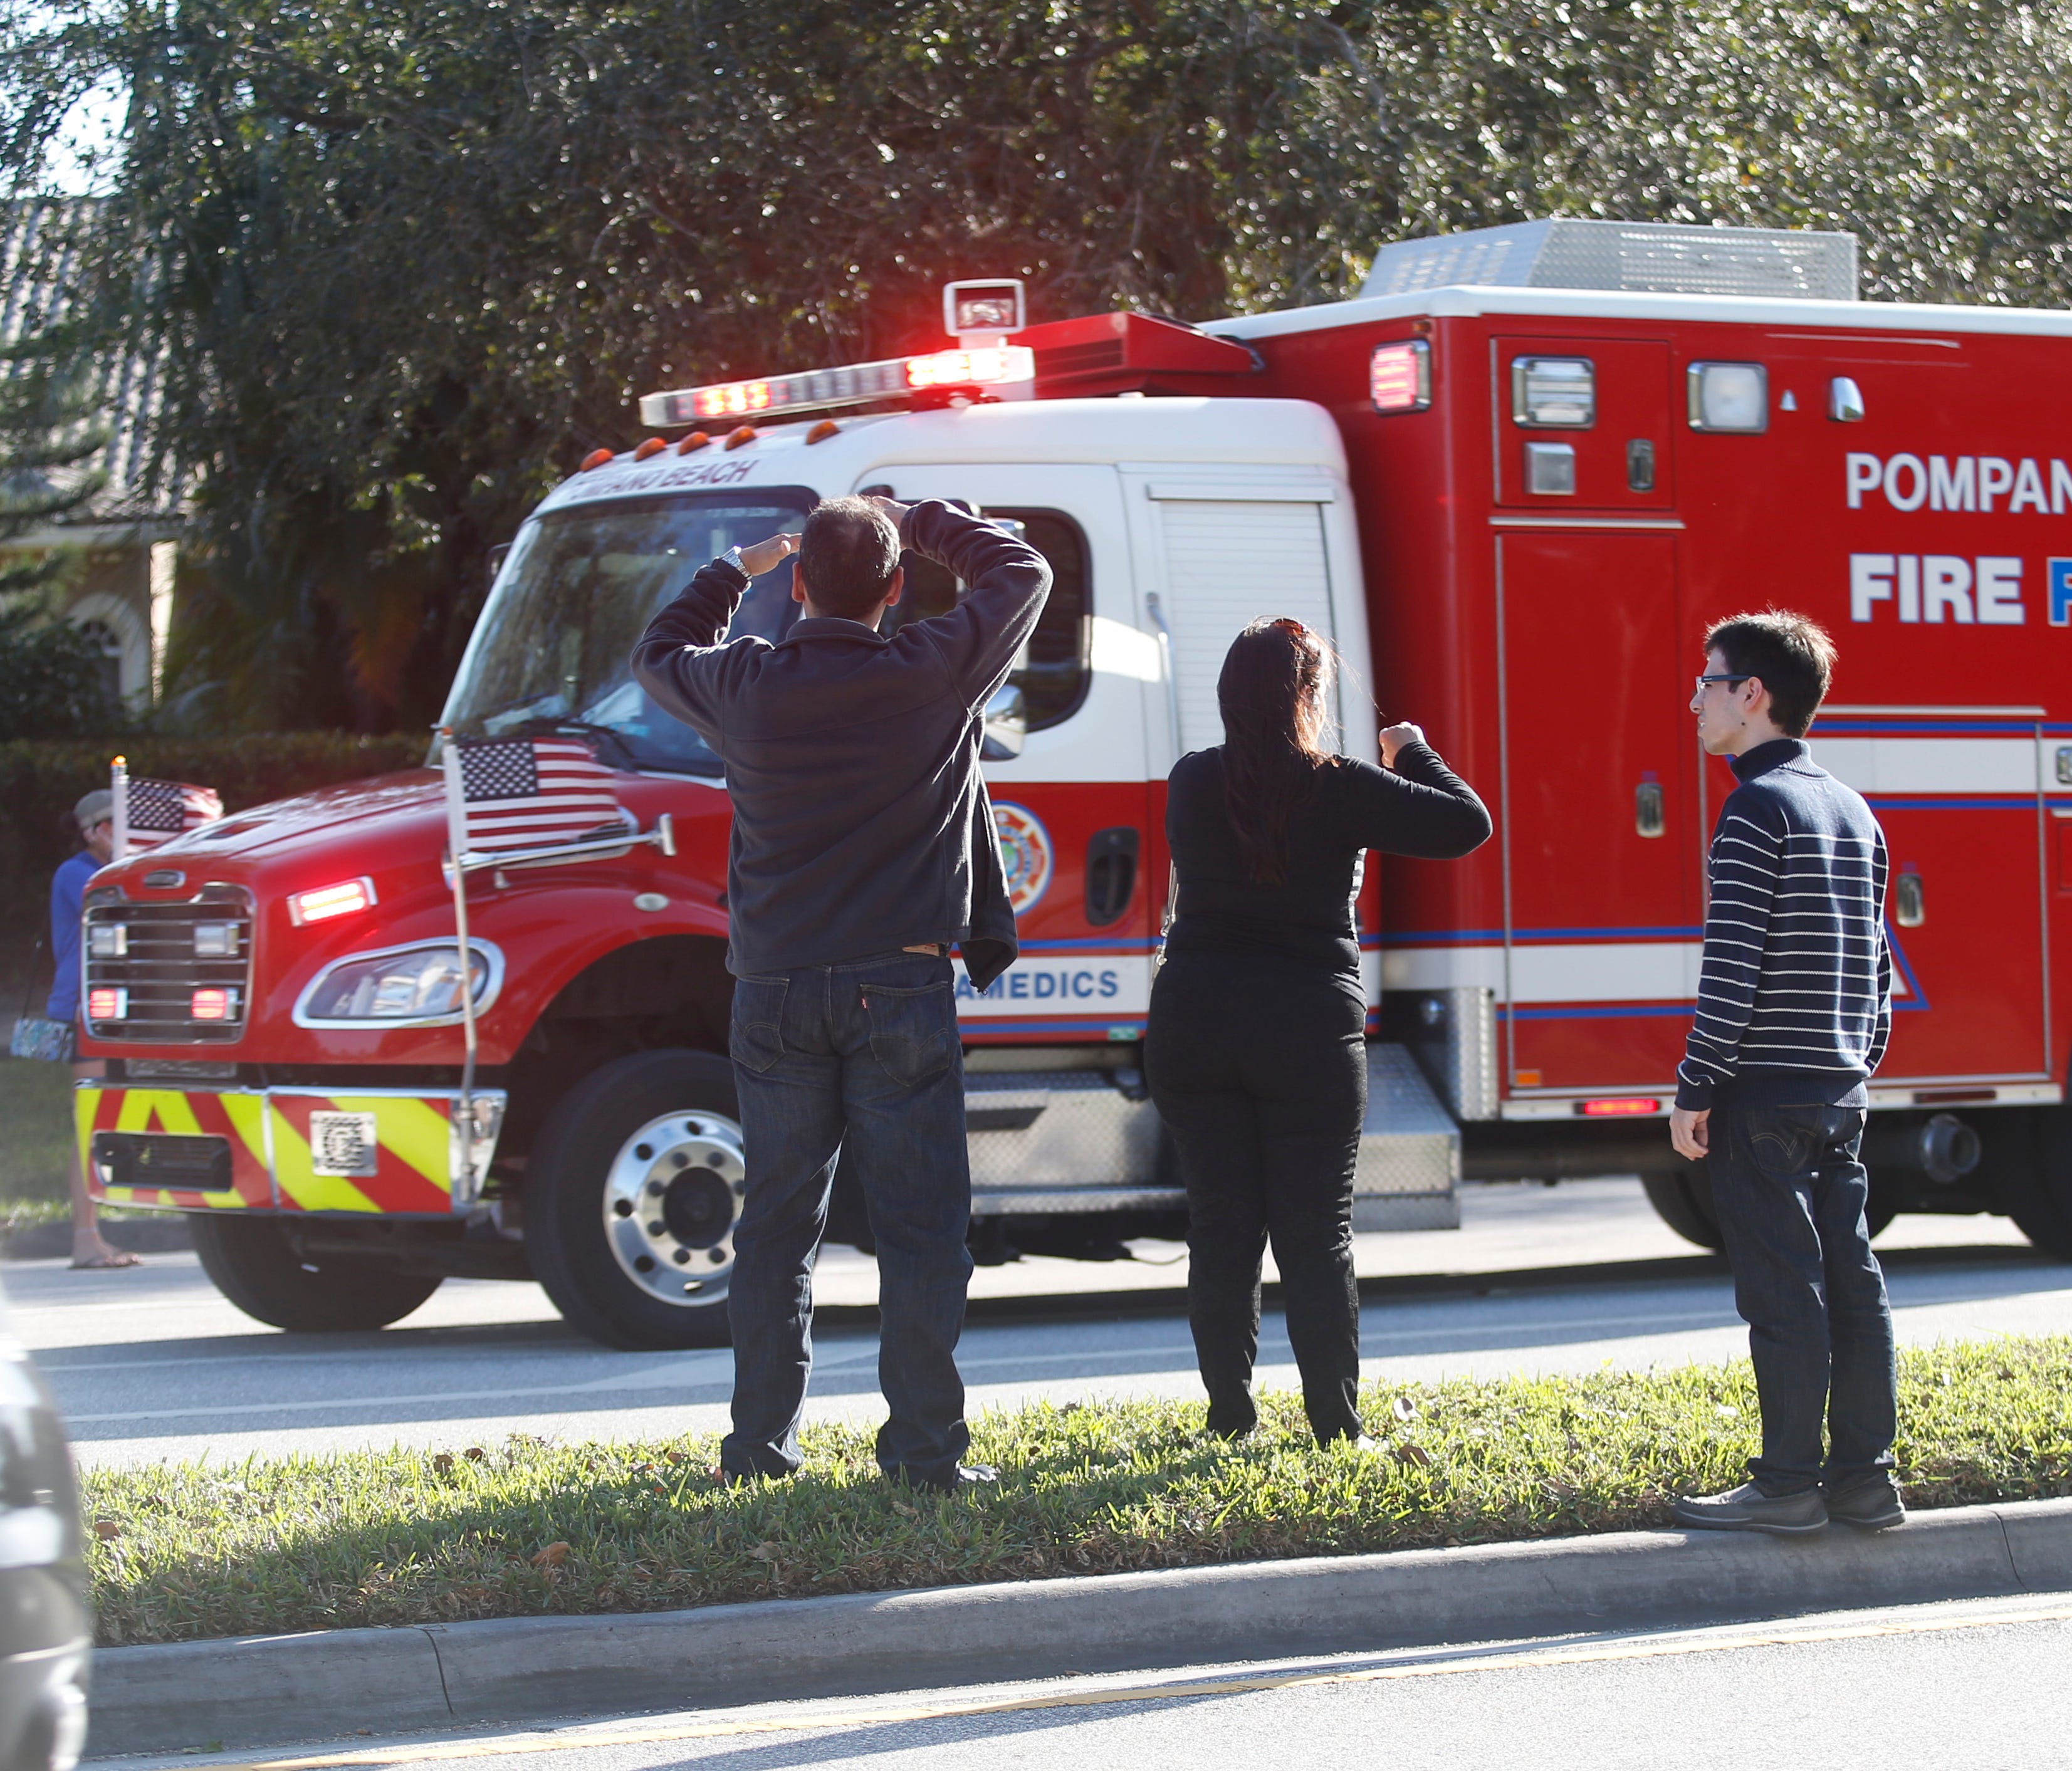 Anxious family members watch a rescue vehicle pass by in Parkland, Fla.